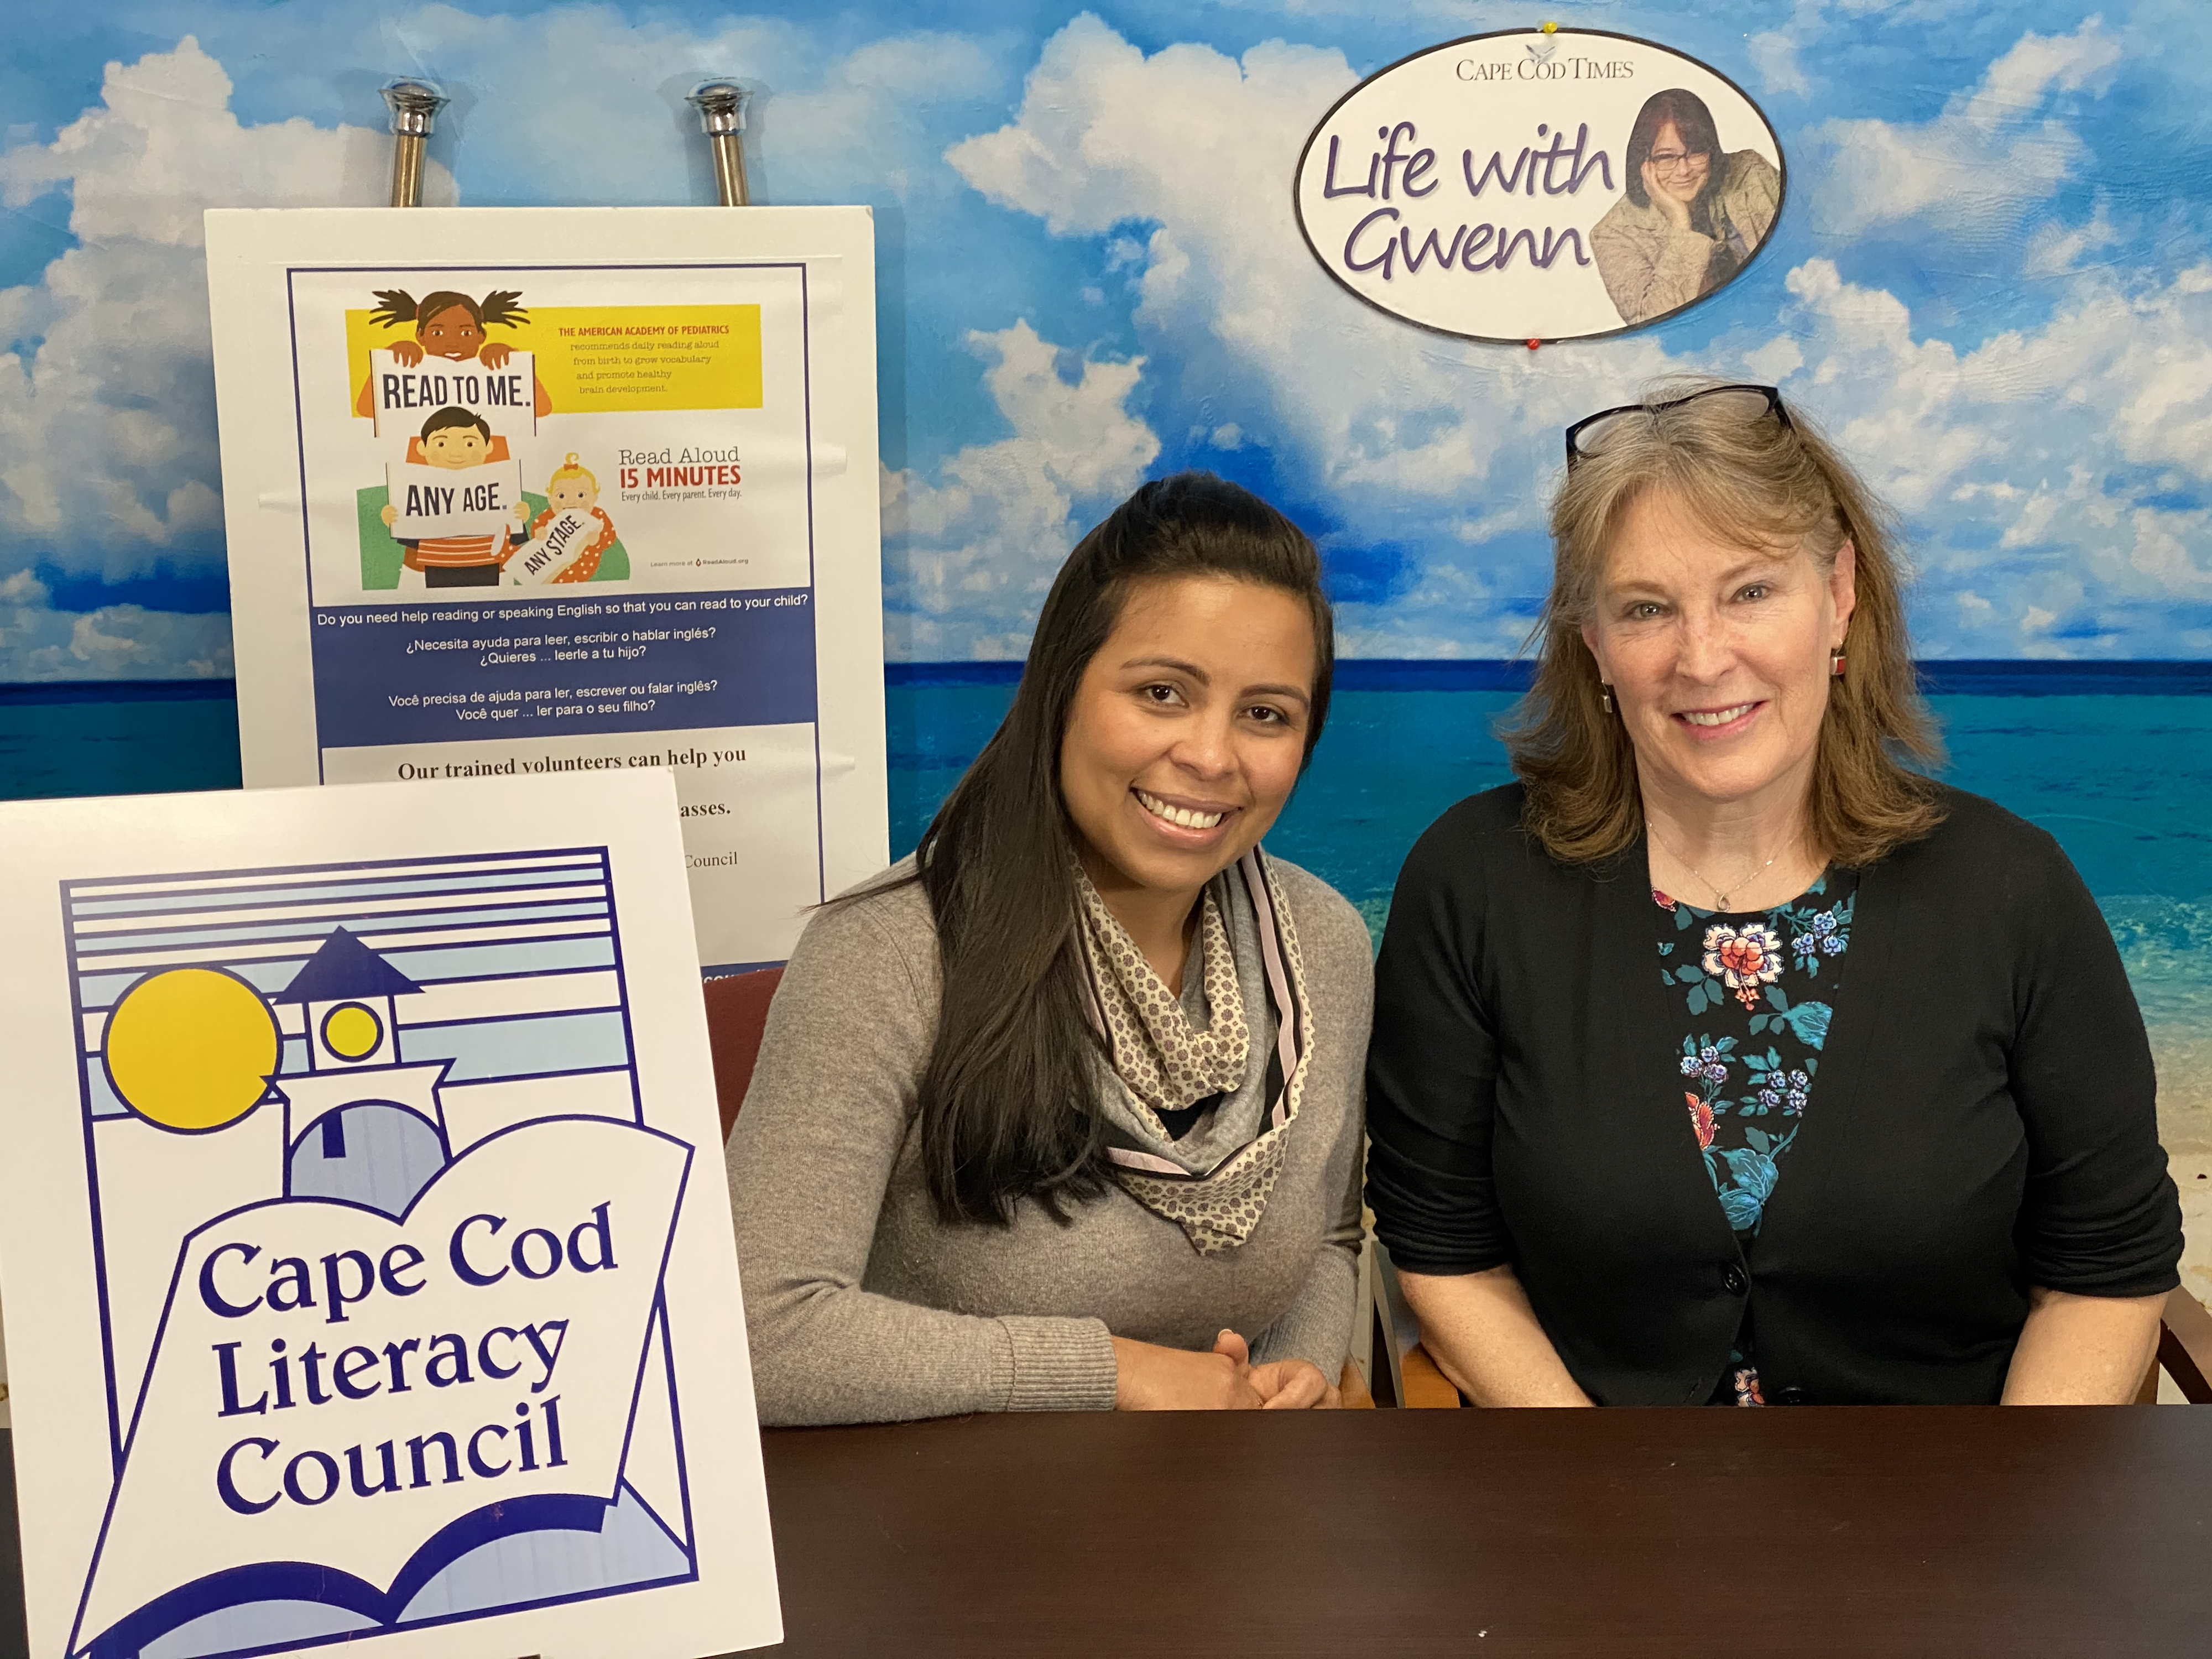 Cape Cod Literacy Council on 'Life With Gwenn'